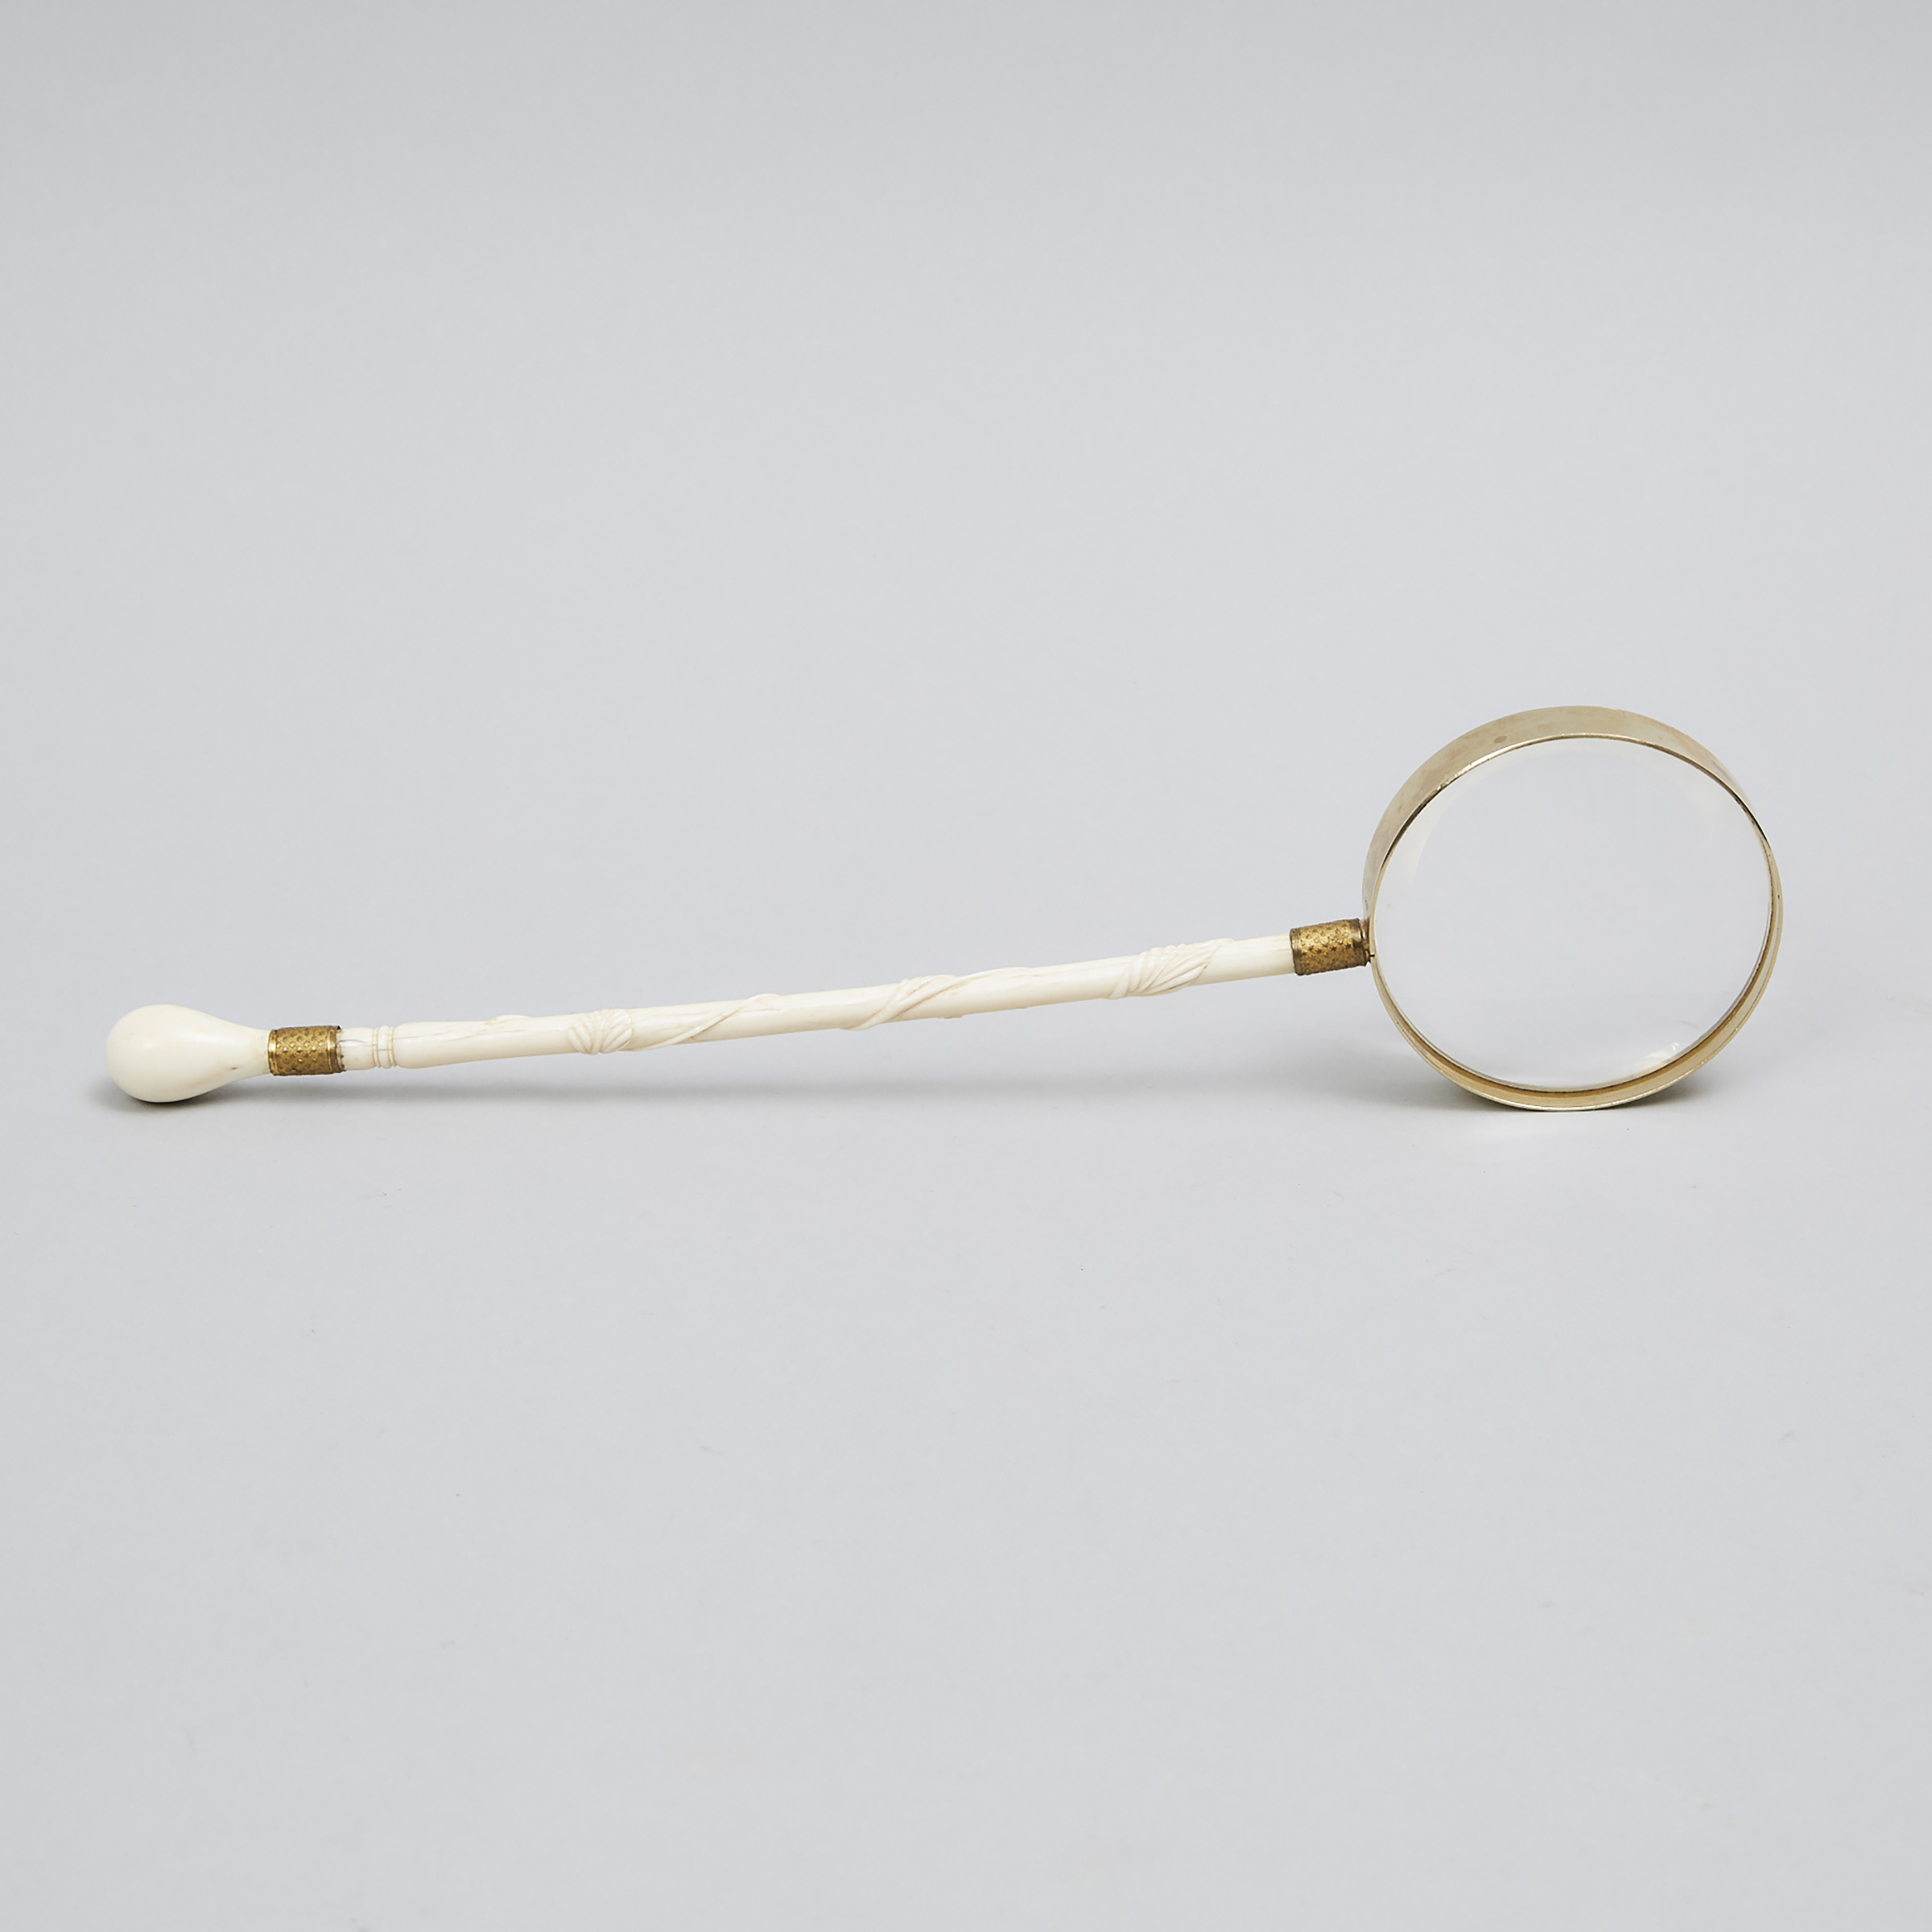 French Carved Ivory Parasol Handled Magnifying Glass, 19th century and later